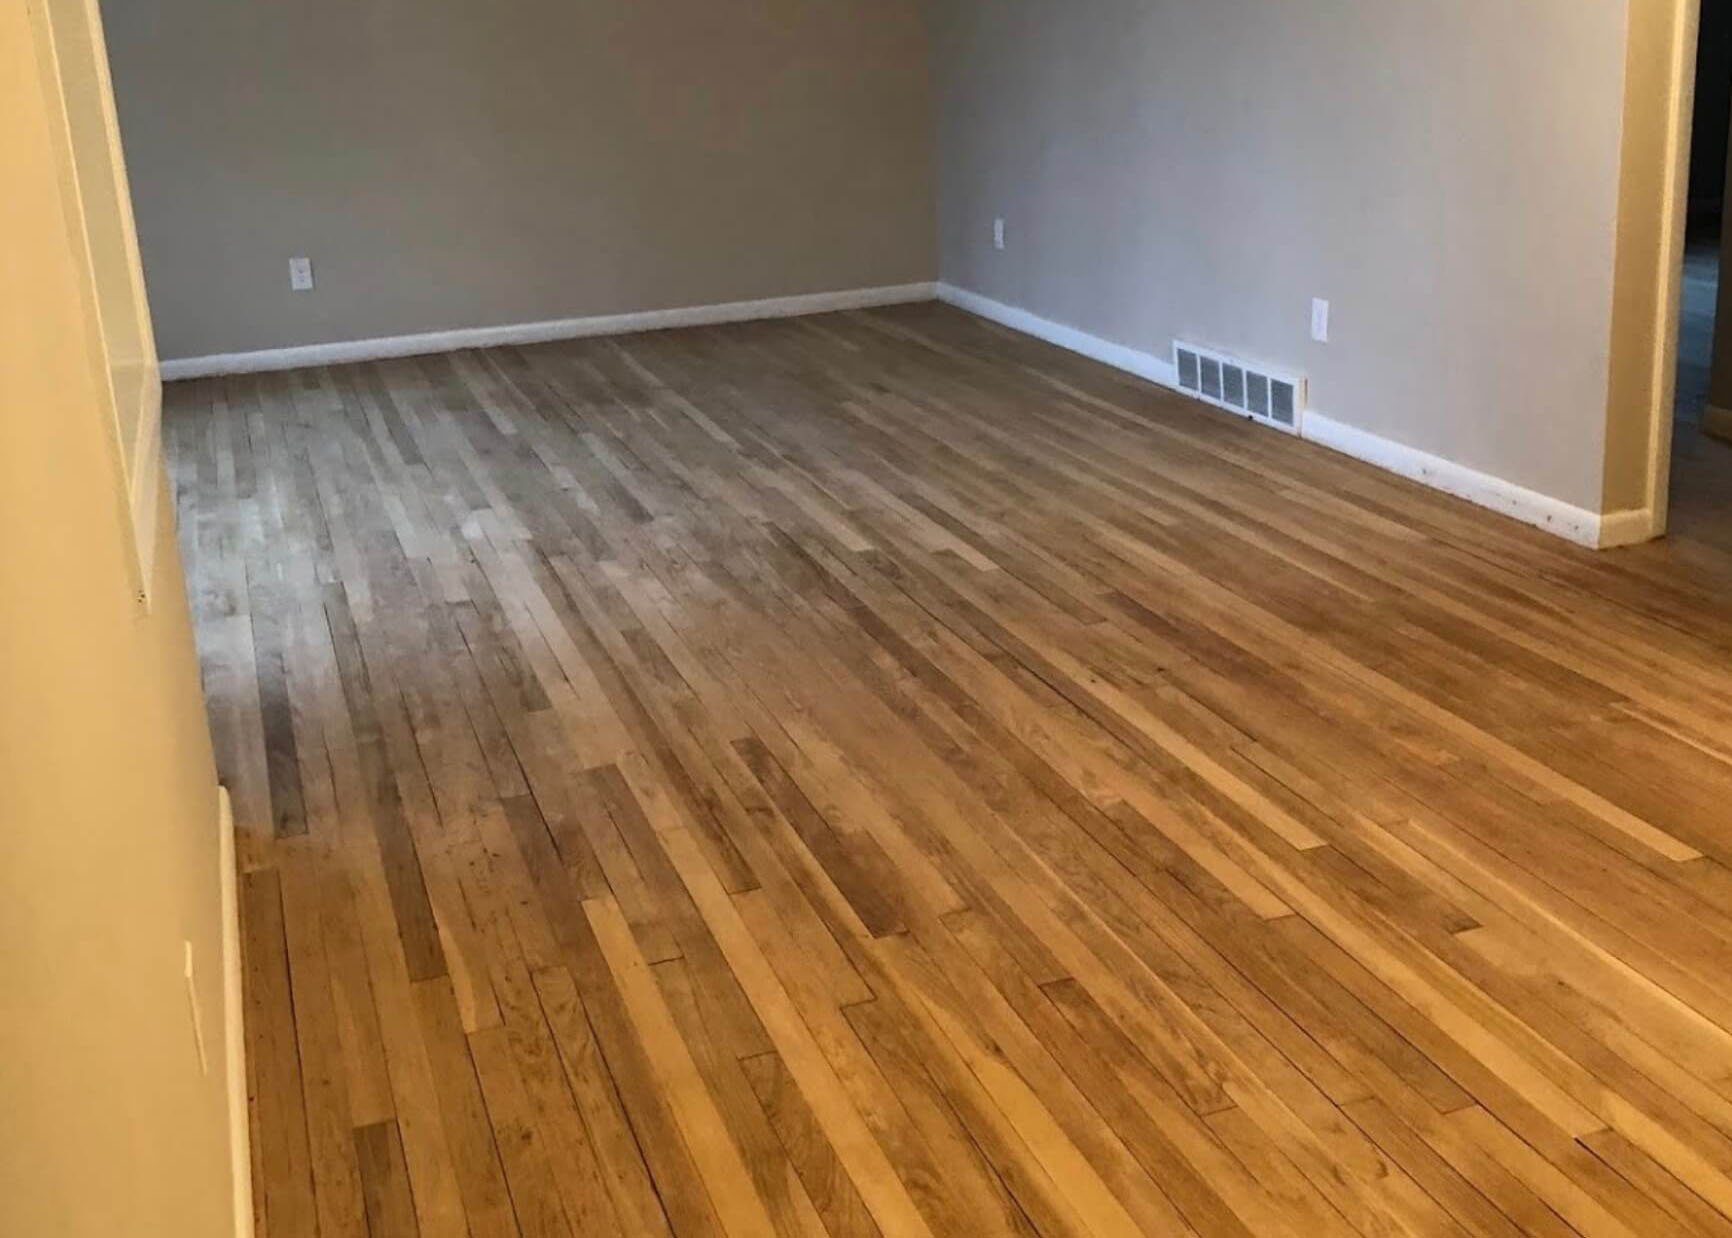 A floor that needs to be refinished